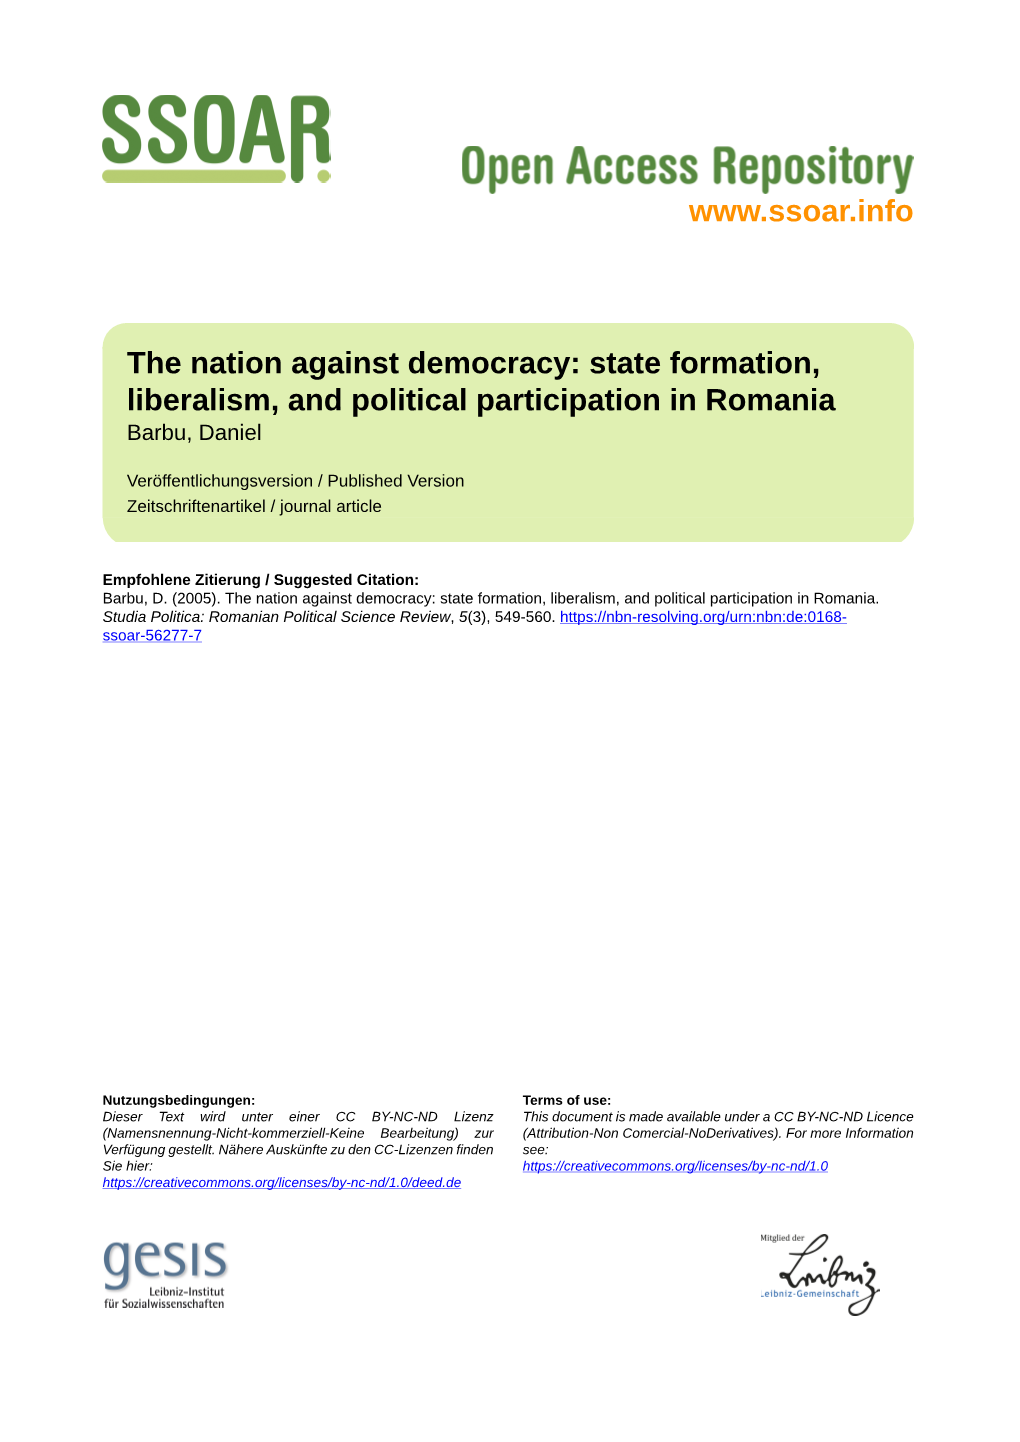 The Nation Against Democracy: State Formation, Liberalism, and Political Participation in Romania Barbu, Daniel